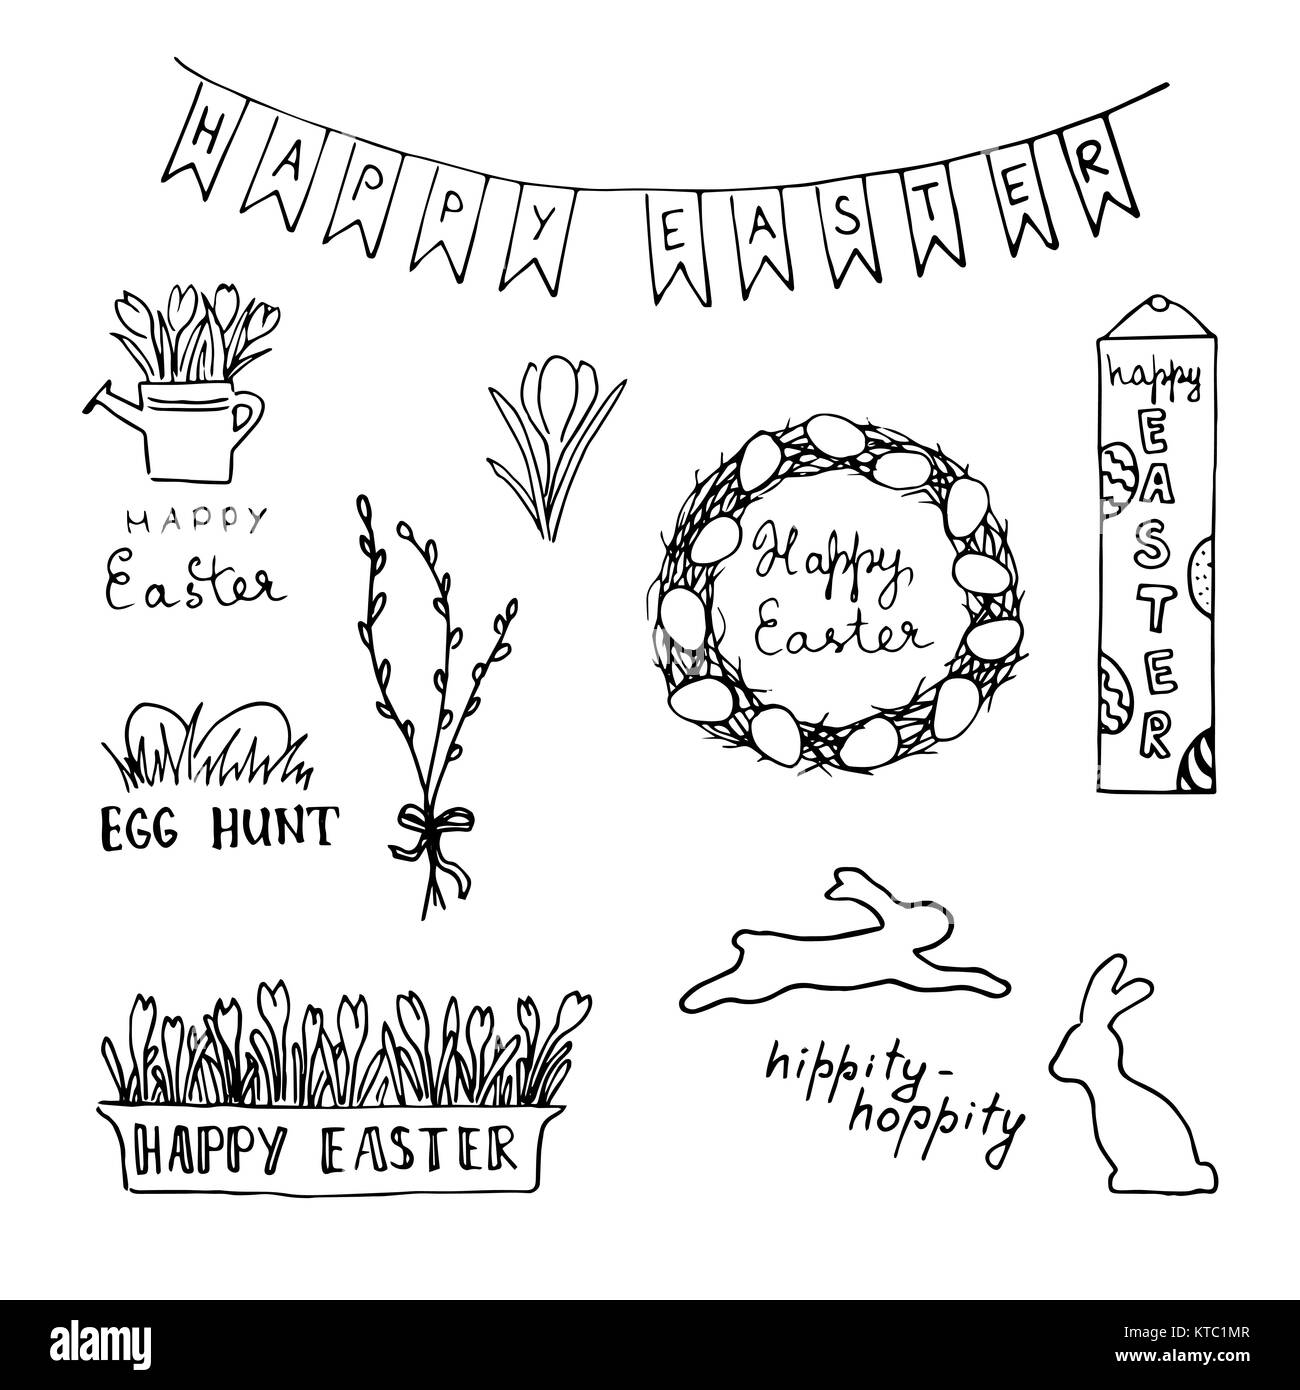 Happy easter card with eggs, rabbits, flowers, lettering, wreath. Stock Photo